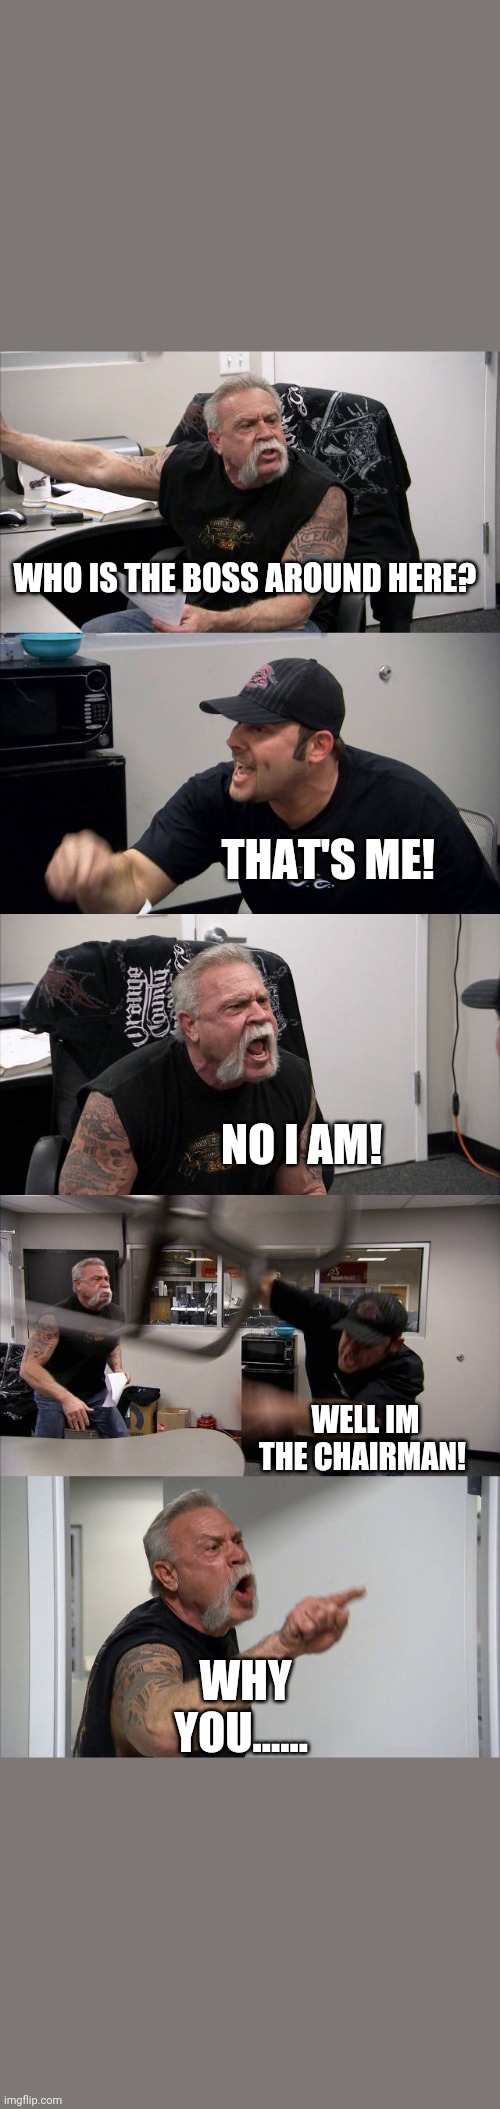 American Chopper Argument | WHO IS THE BOSS AROUND HERE? THAT'S ME! NO I AM! WELL IM THE CHAIRMAN! WHY YOU...... | image tagged in memes,american chopper argument | made w/ Imgflip meme maker